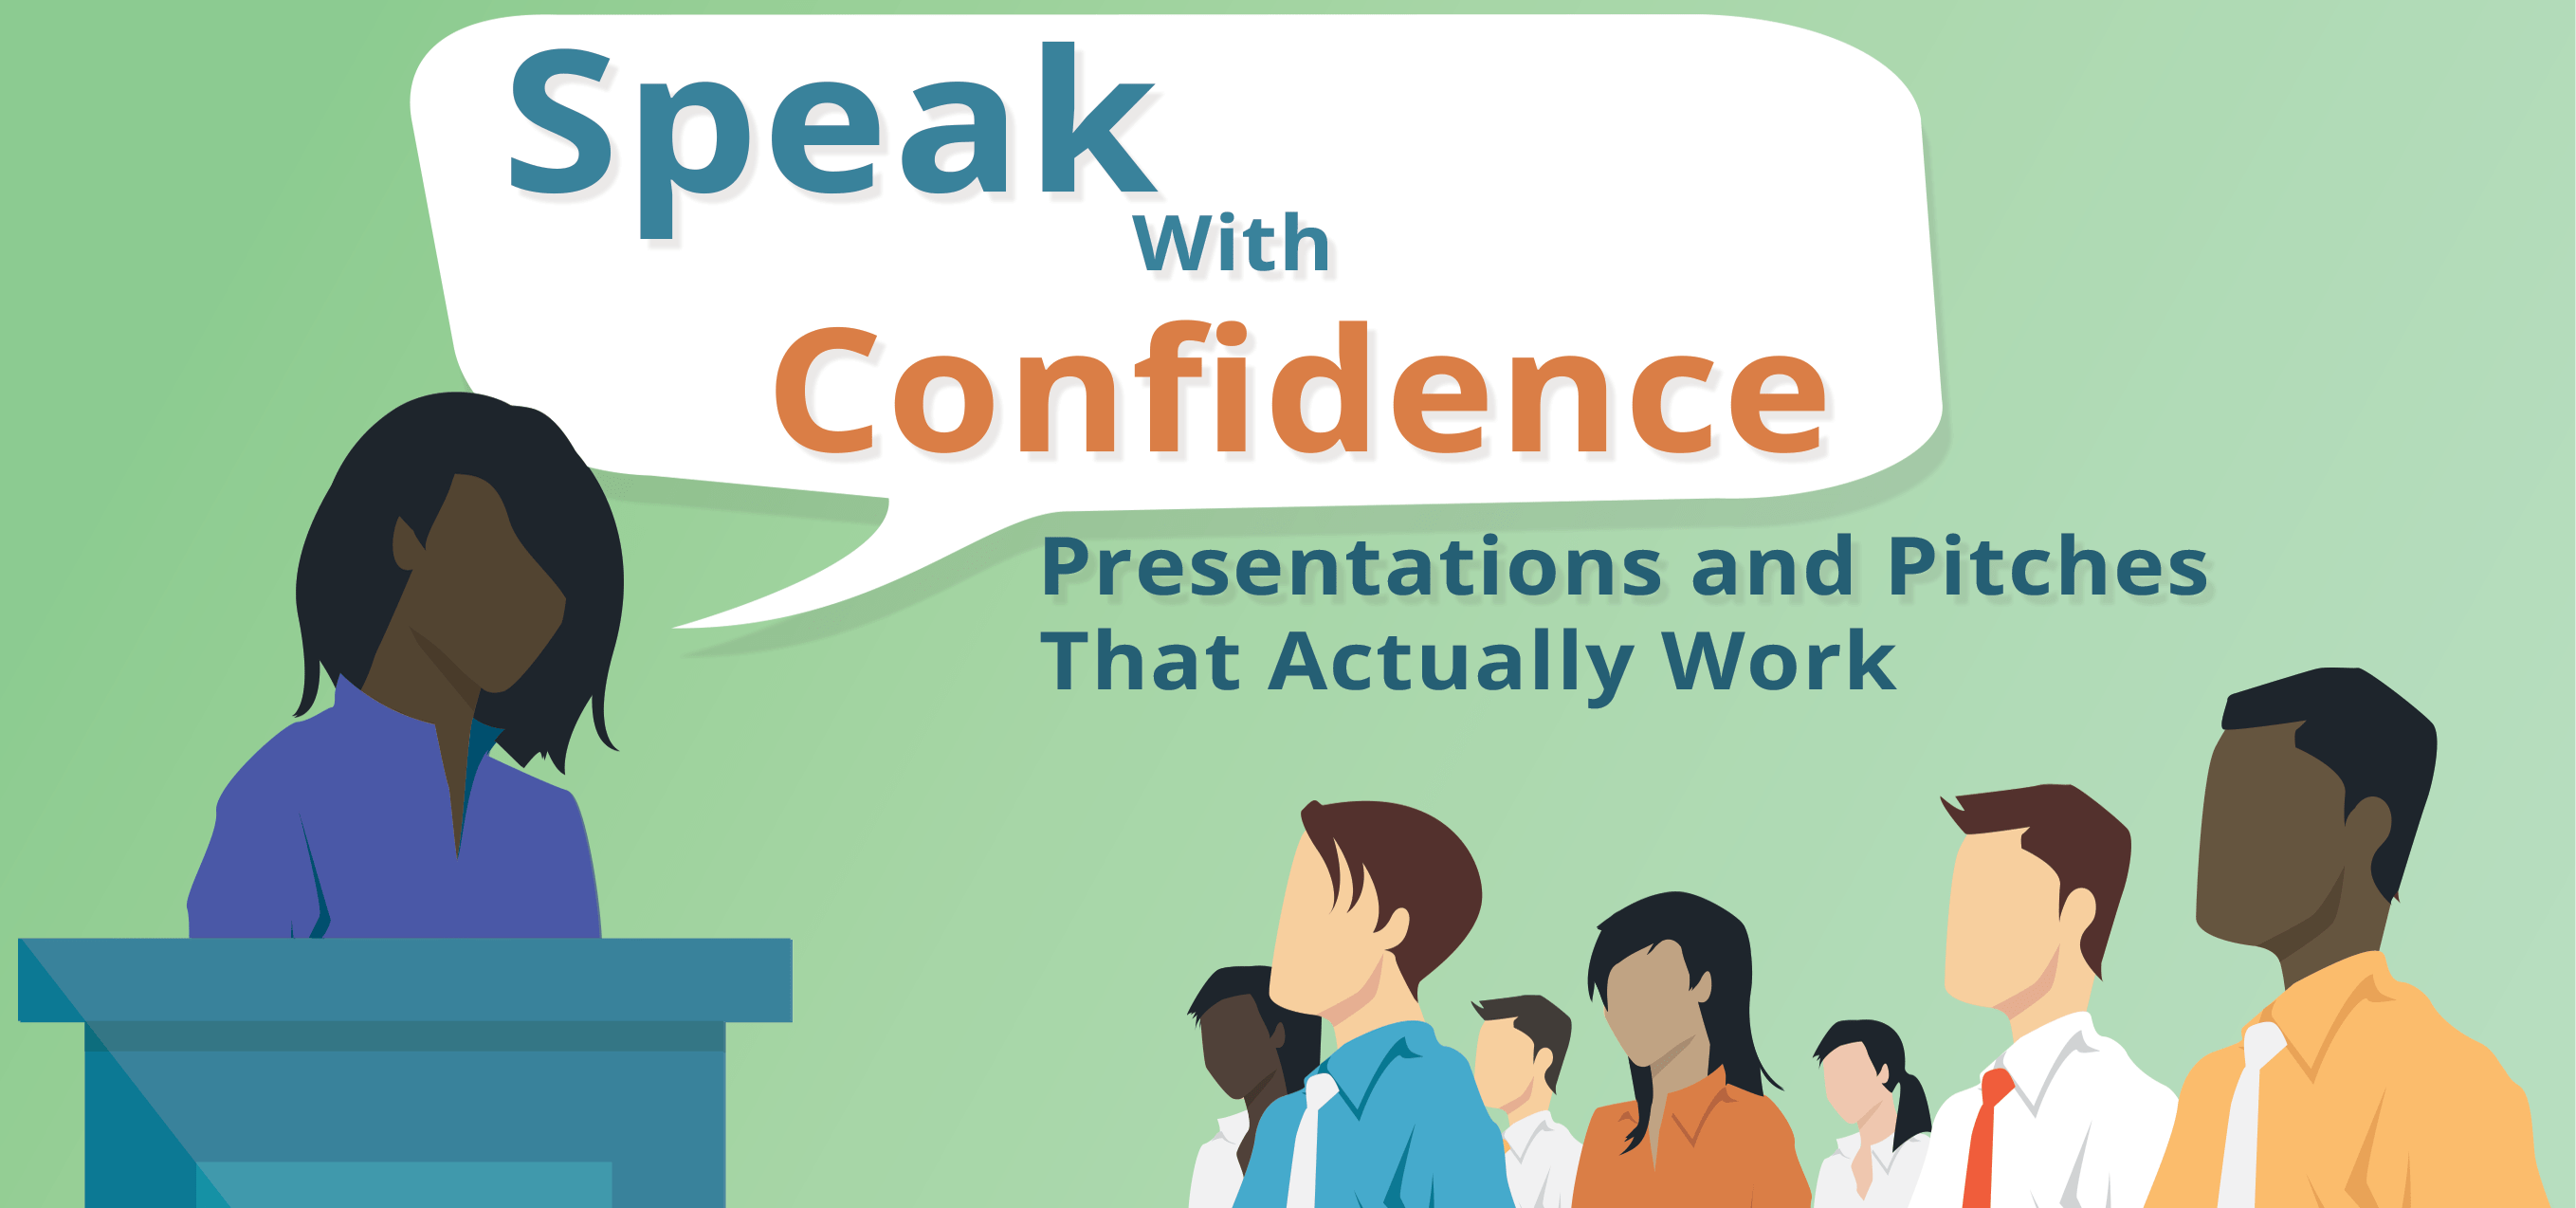 how to give presentations with confidence in english